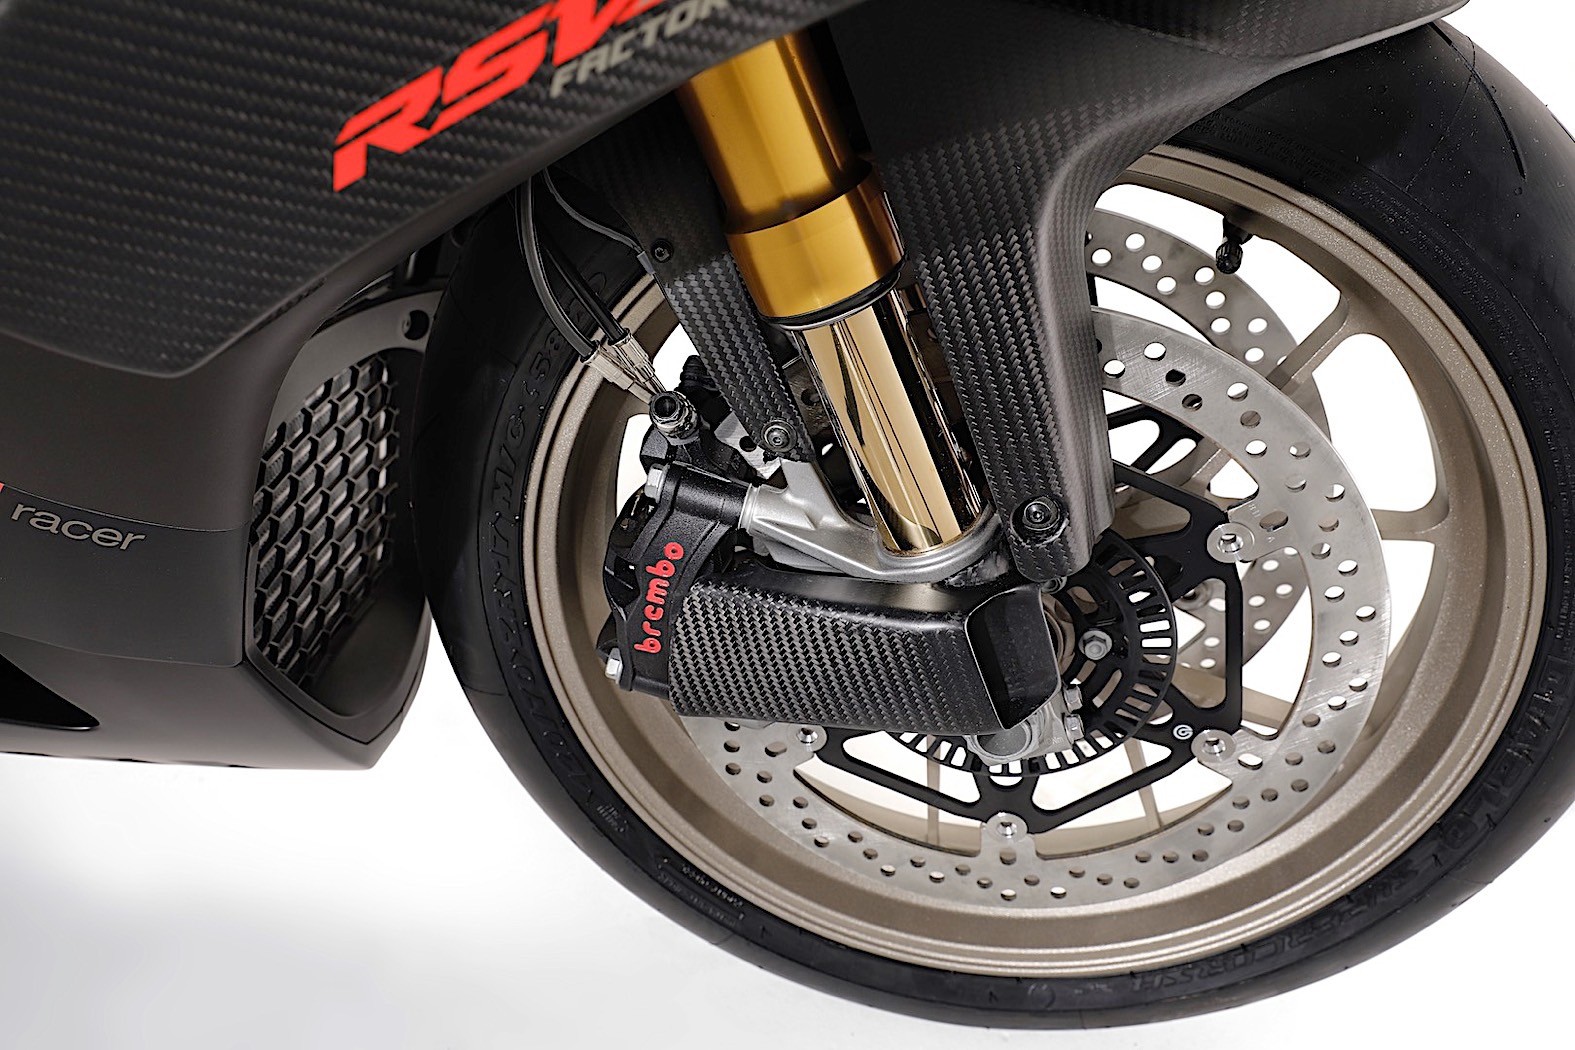 2019-aprilia-rsv4-1100-factory-is-the-most-powerful-rsv4-ever_1.jpg